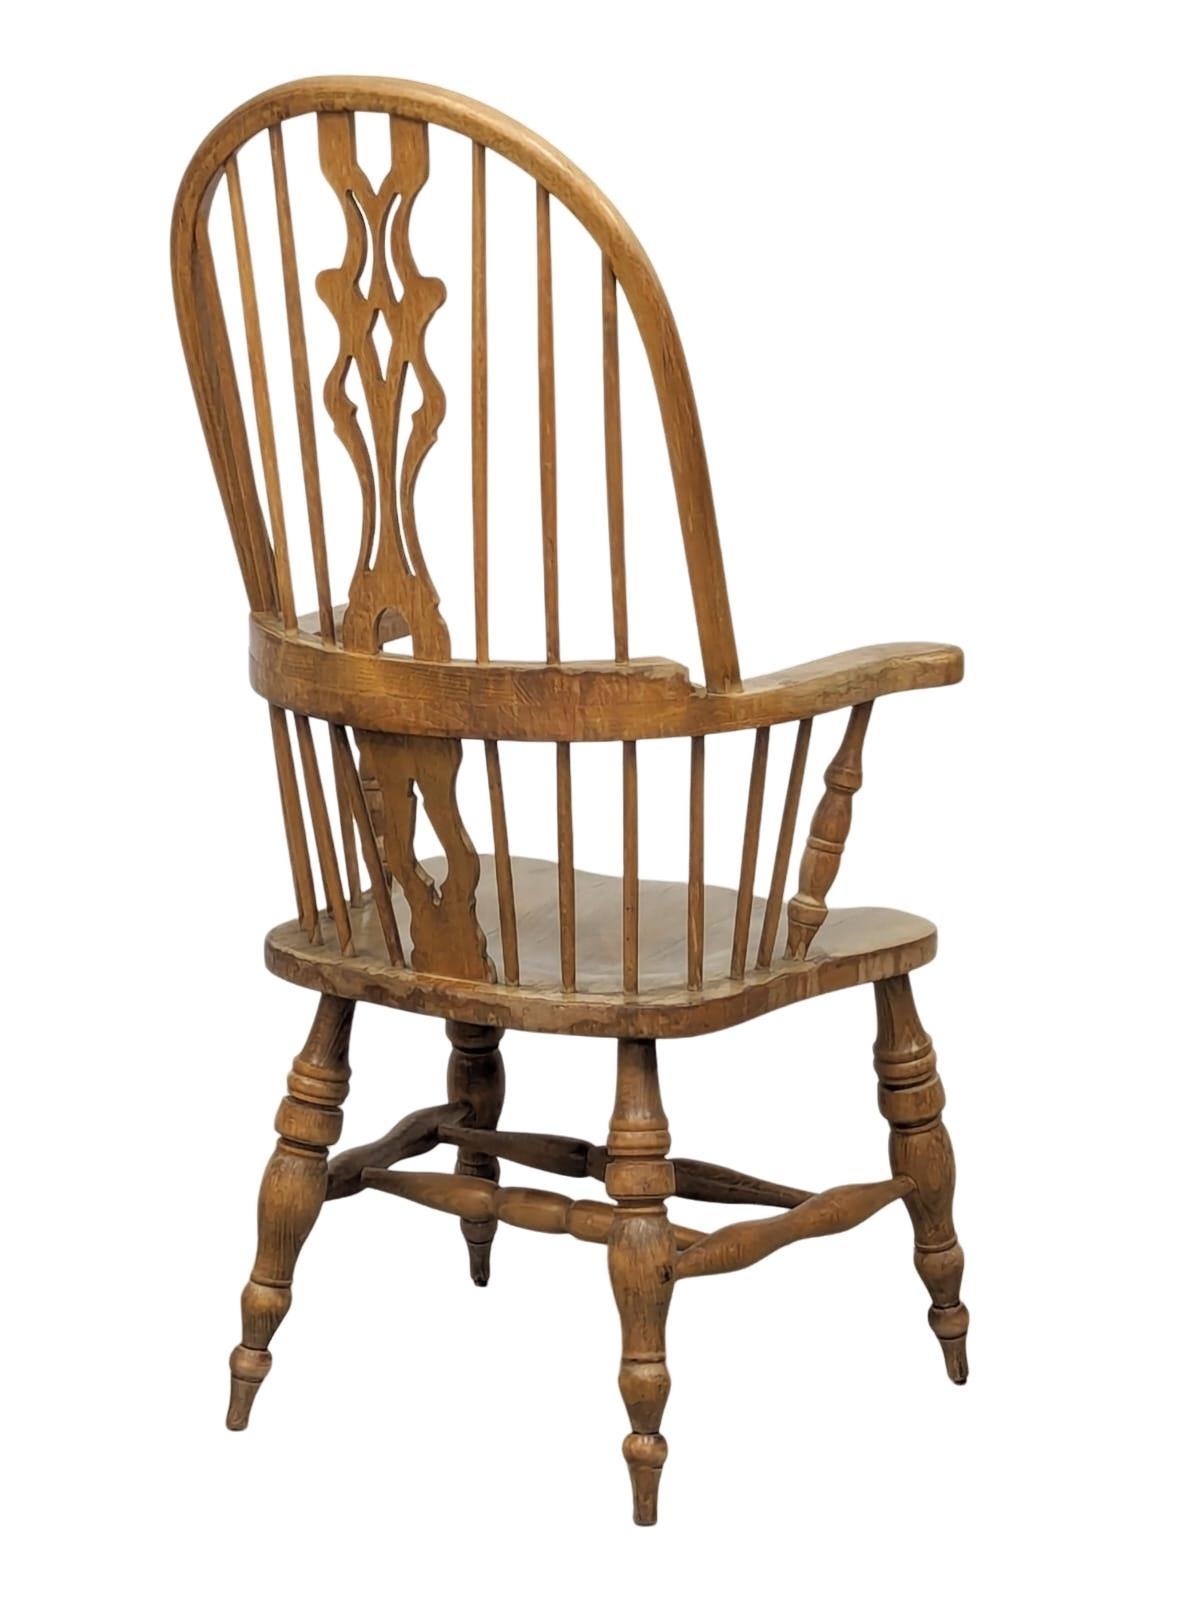 A 19th Century style Windsor armchair. - Image 2 of 4